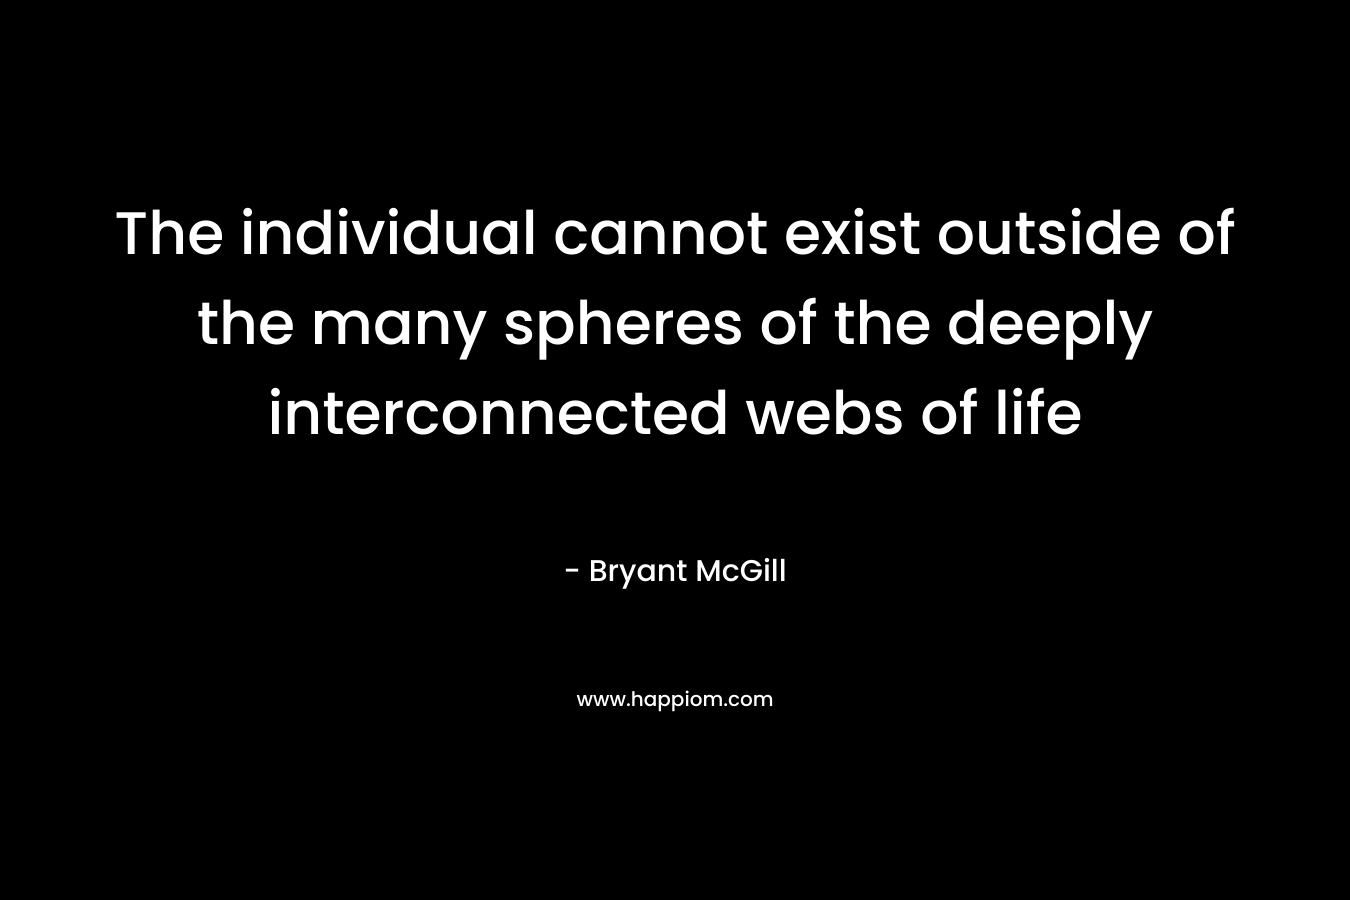 The individual cannot exist outside of the many spheres of the deeply interconnected webs of life – Bryant McGill